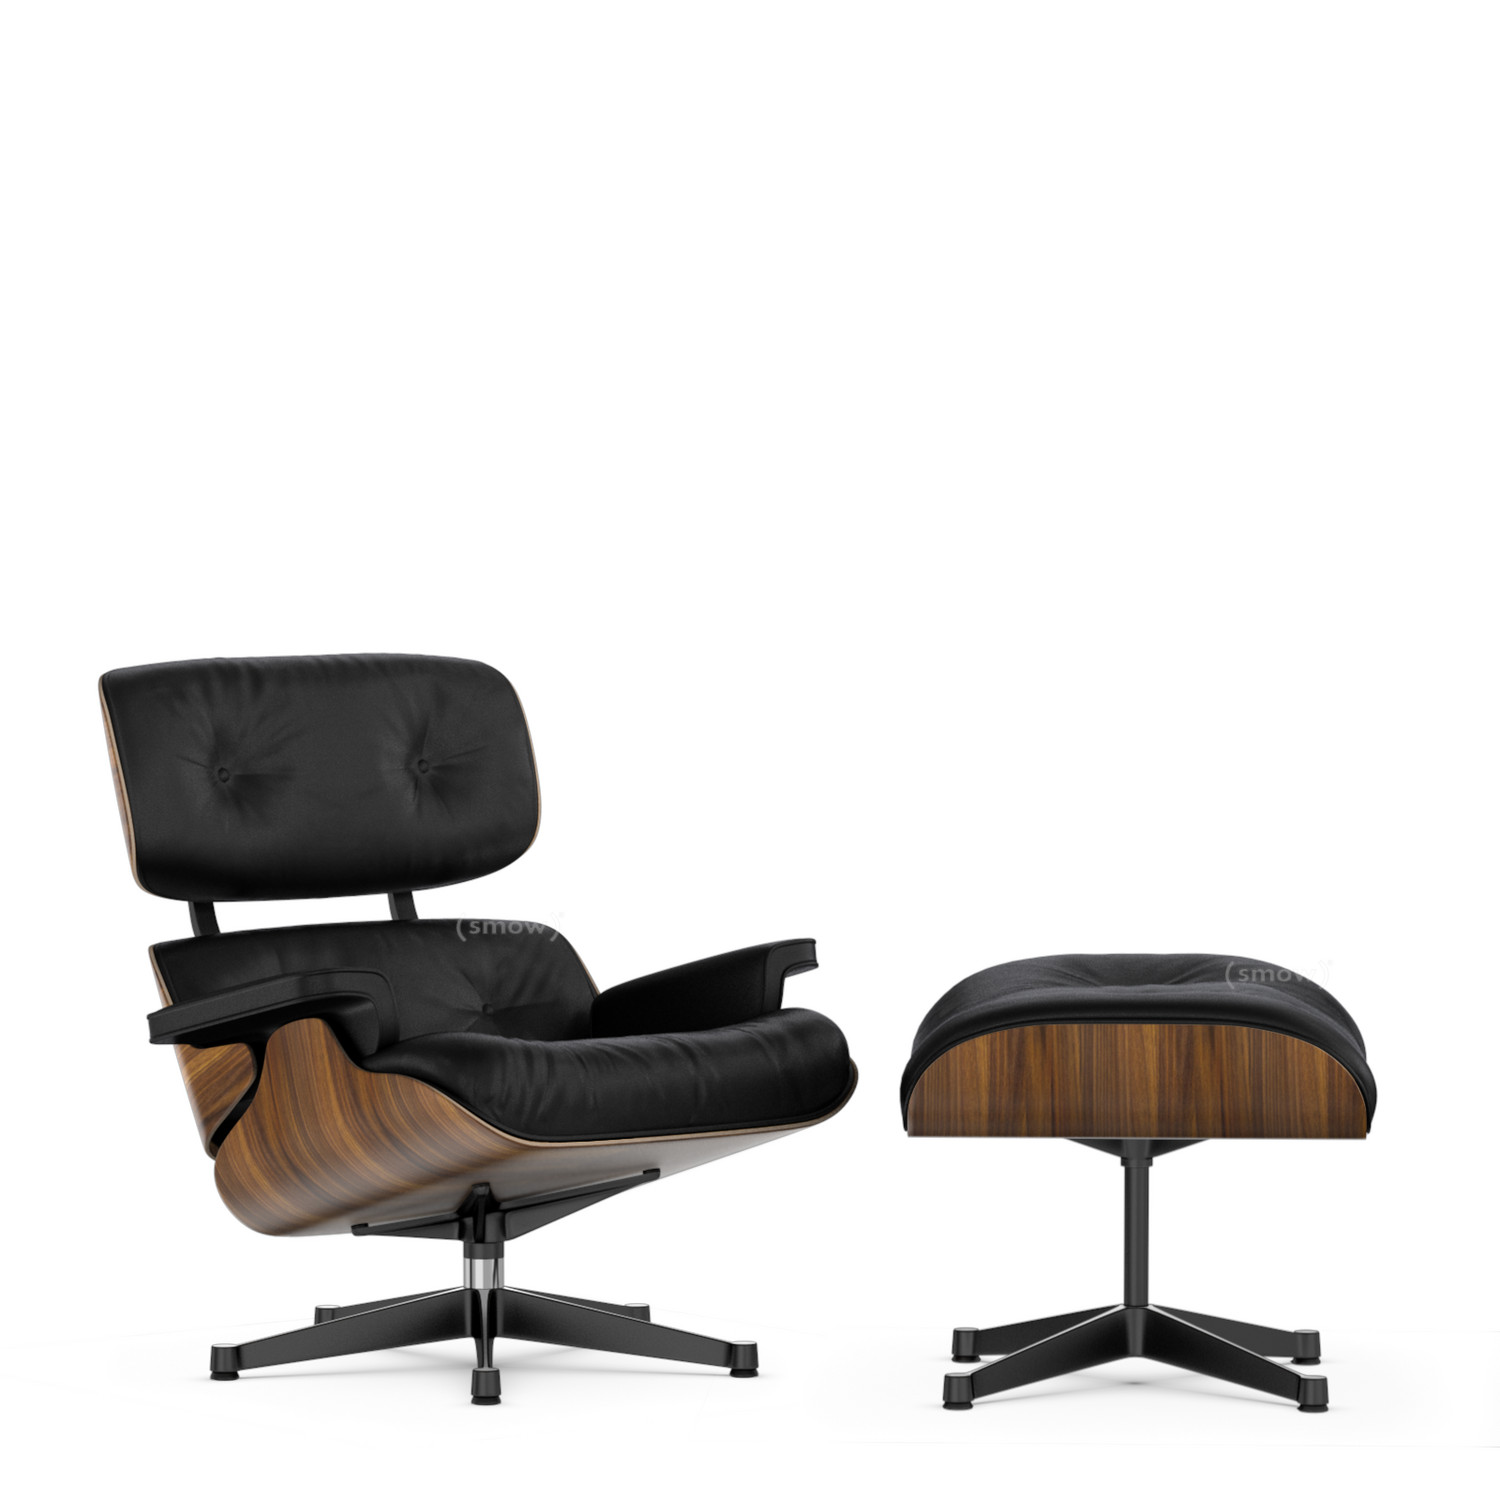 Vitra Lounge Chair & by Charles & Ray Eames, 1956 Designer furniture smow.com